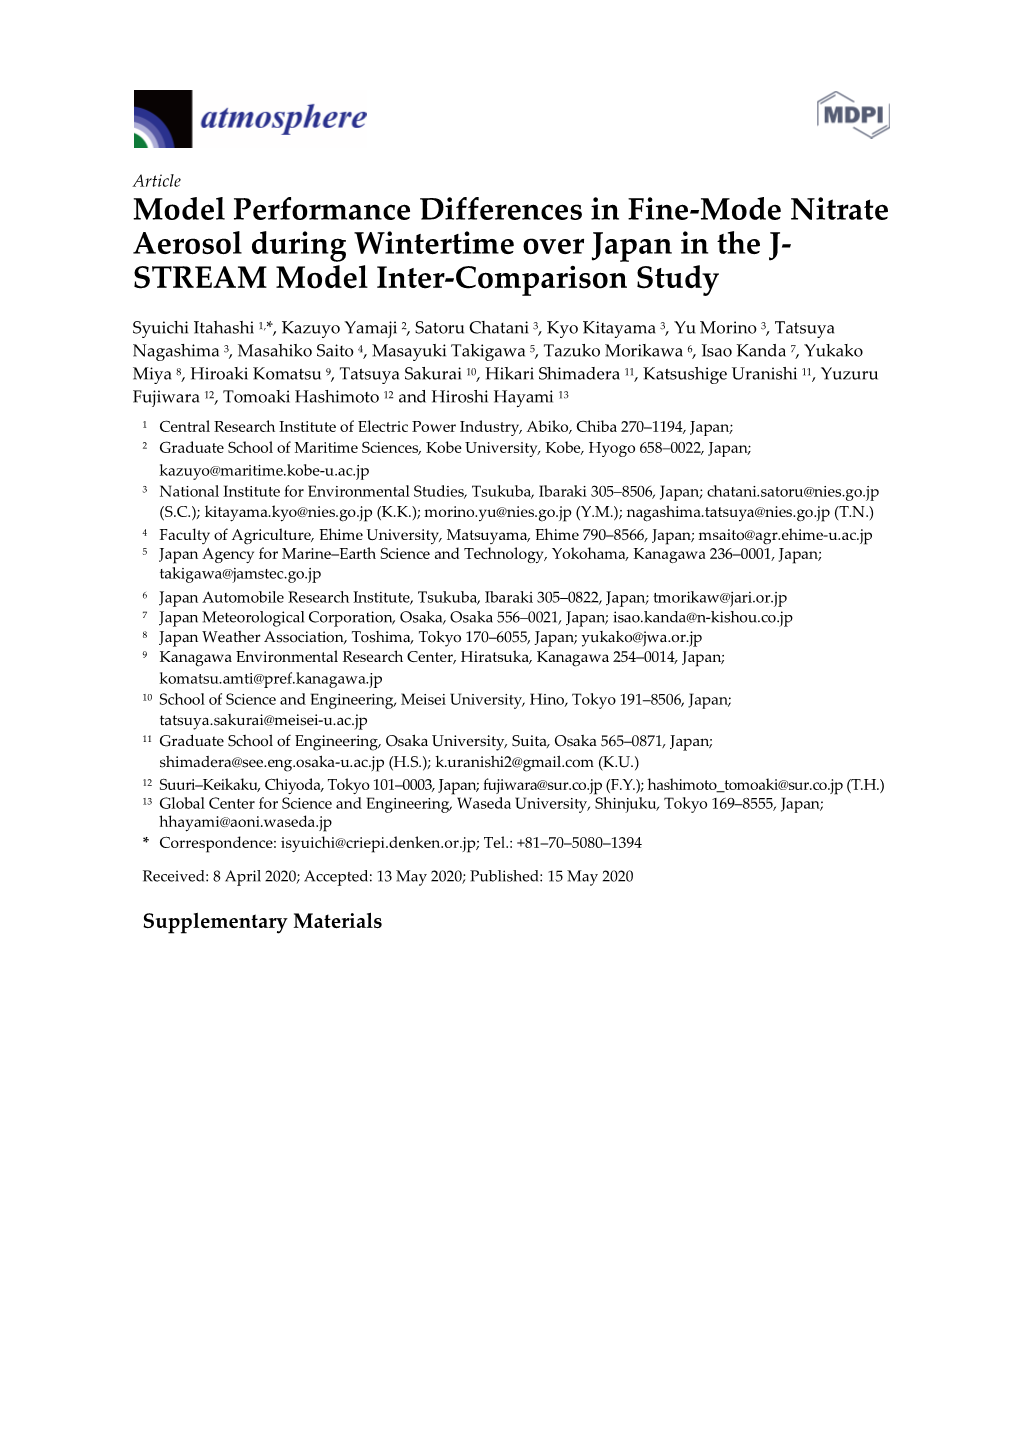 Model Performance Differences in Fine-Mode Nitrate Aerosol During Wintertime Over Japan in the J- STREAM Model Inter-Comparison Study